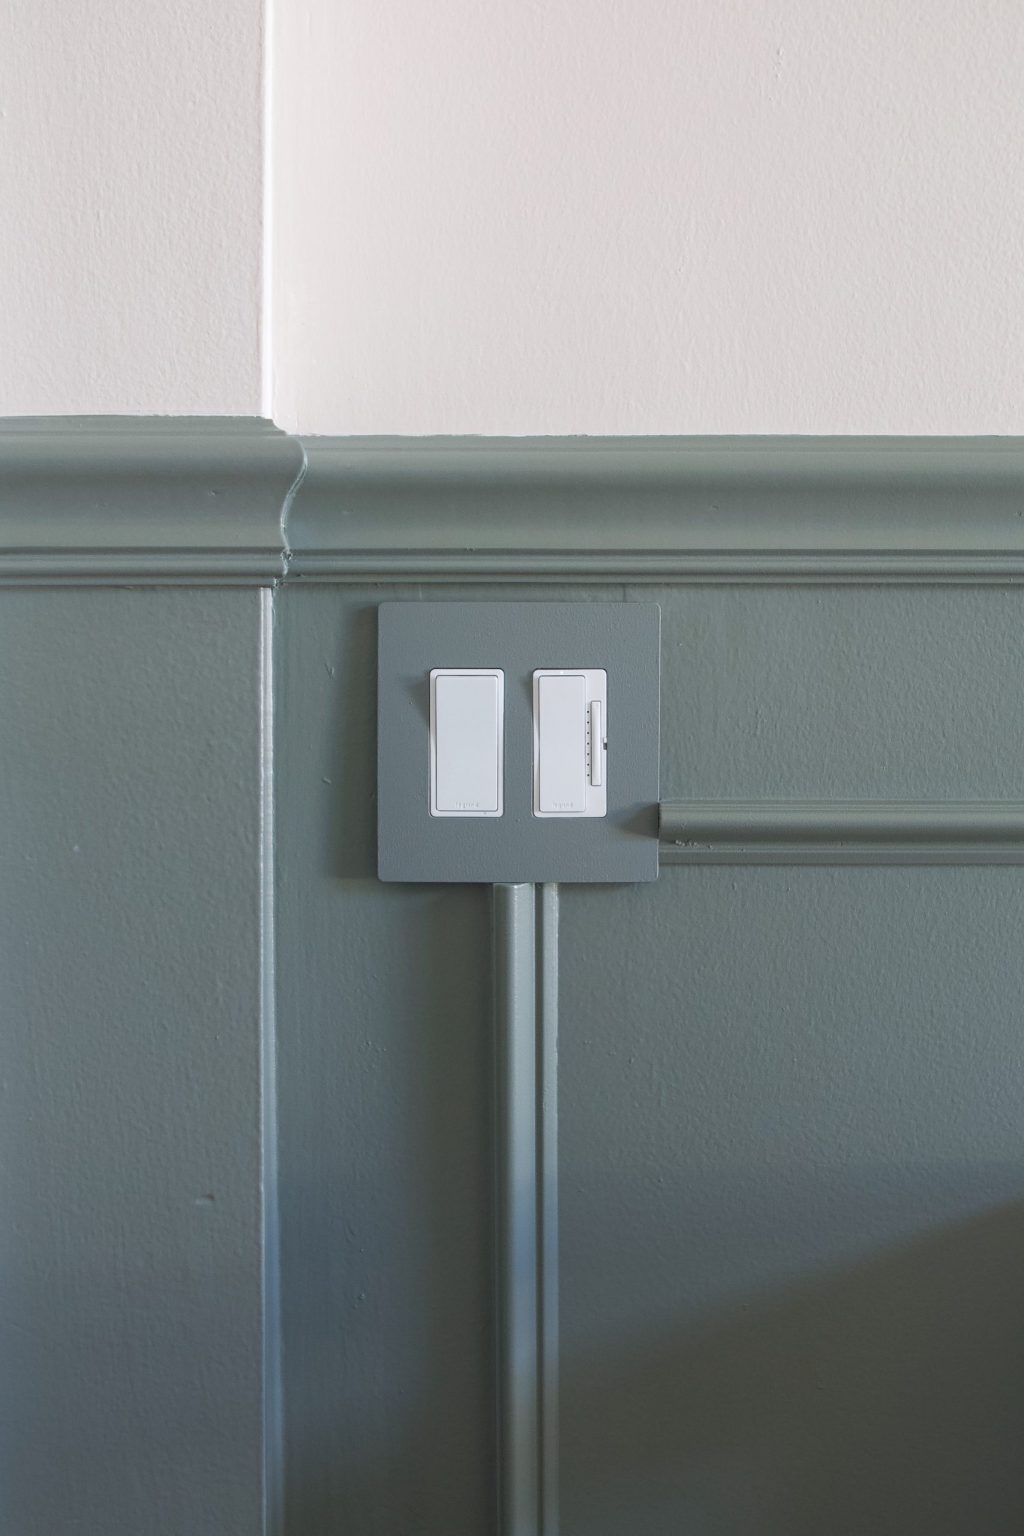 How to paint outlet covers so they don't chip